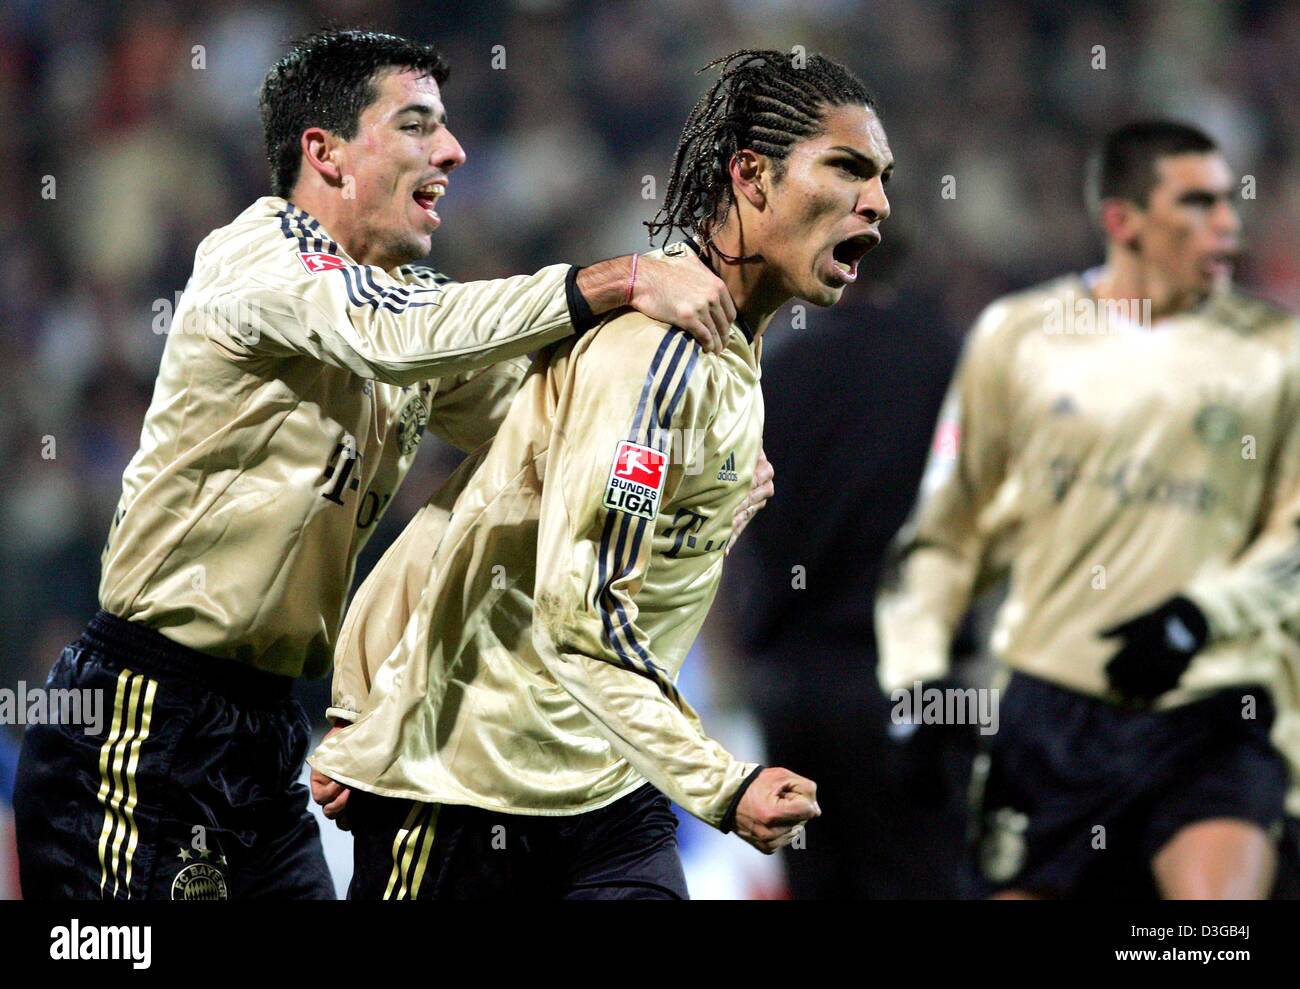 (dpa) - Bayern's Roy Makaay (L) cheers with goalscorer Jose Paolo Guerrero (C) during the Bundesliga game of Bayern Munich against VfL Bochum in Bochum, 14 November 2004. In the background (R) Bayern's Lucio. Bayern won 3-1. Stock Photo